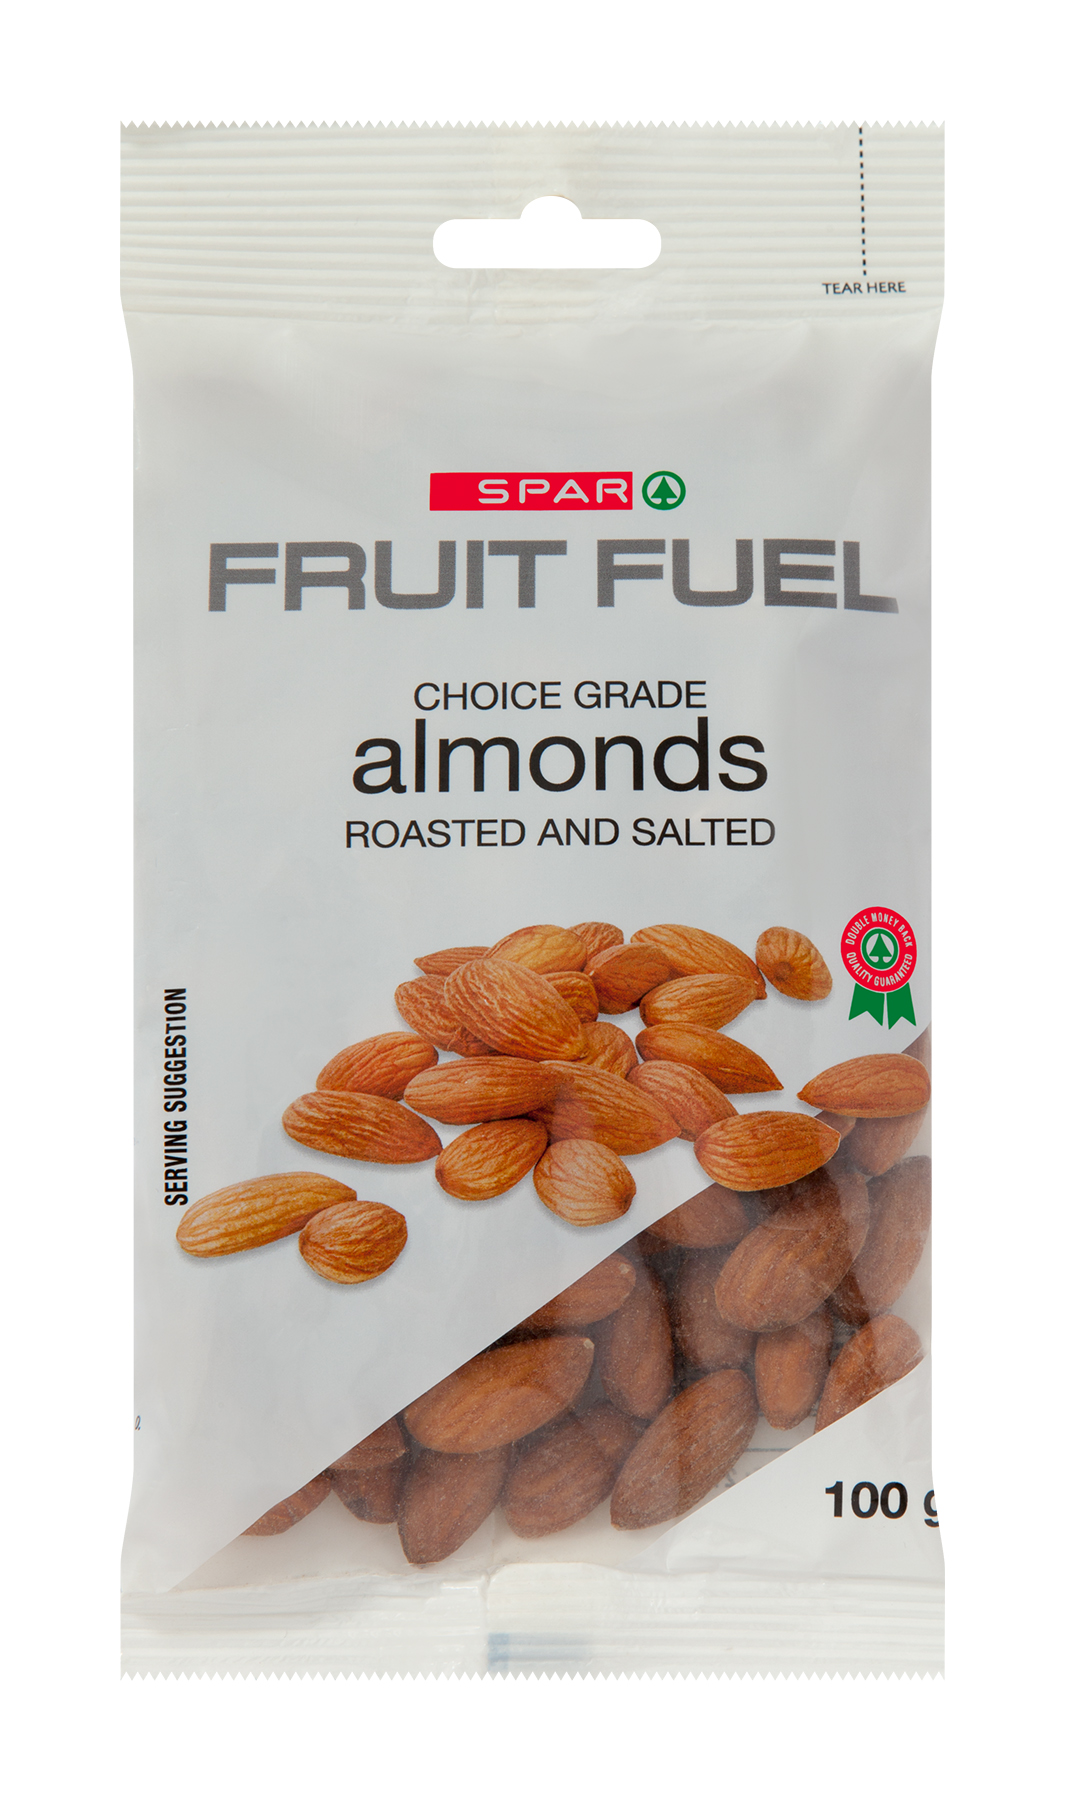 fruit fuel almonds, roasted and salted